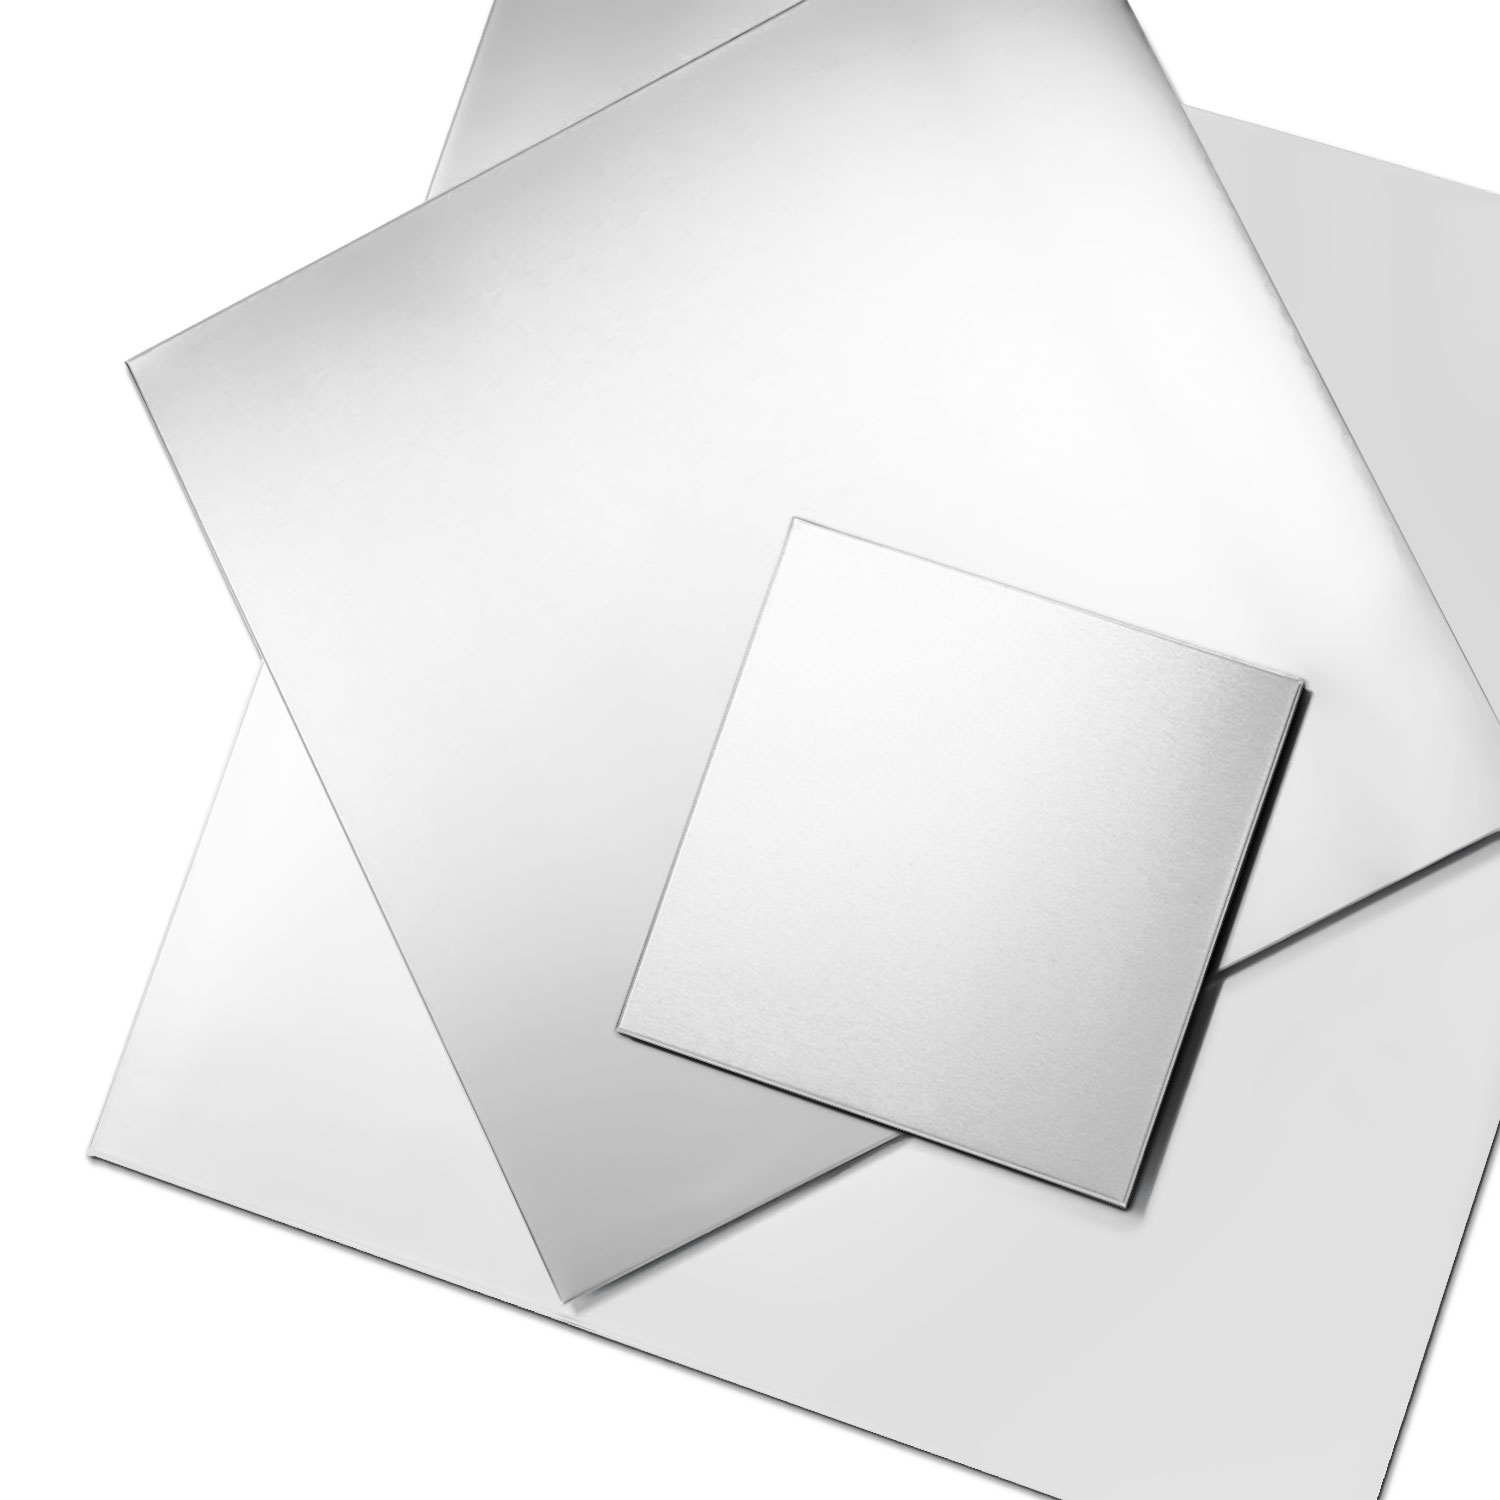 Fine Silver Sheet Thickness 1.20mm